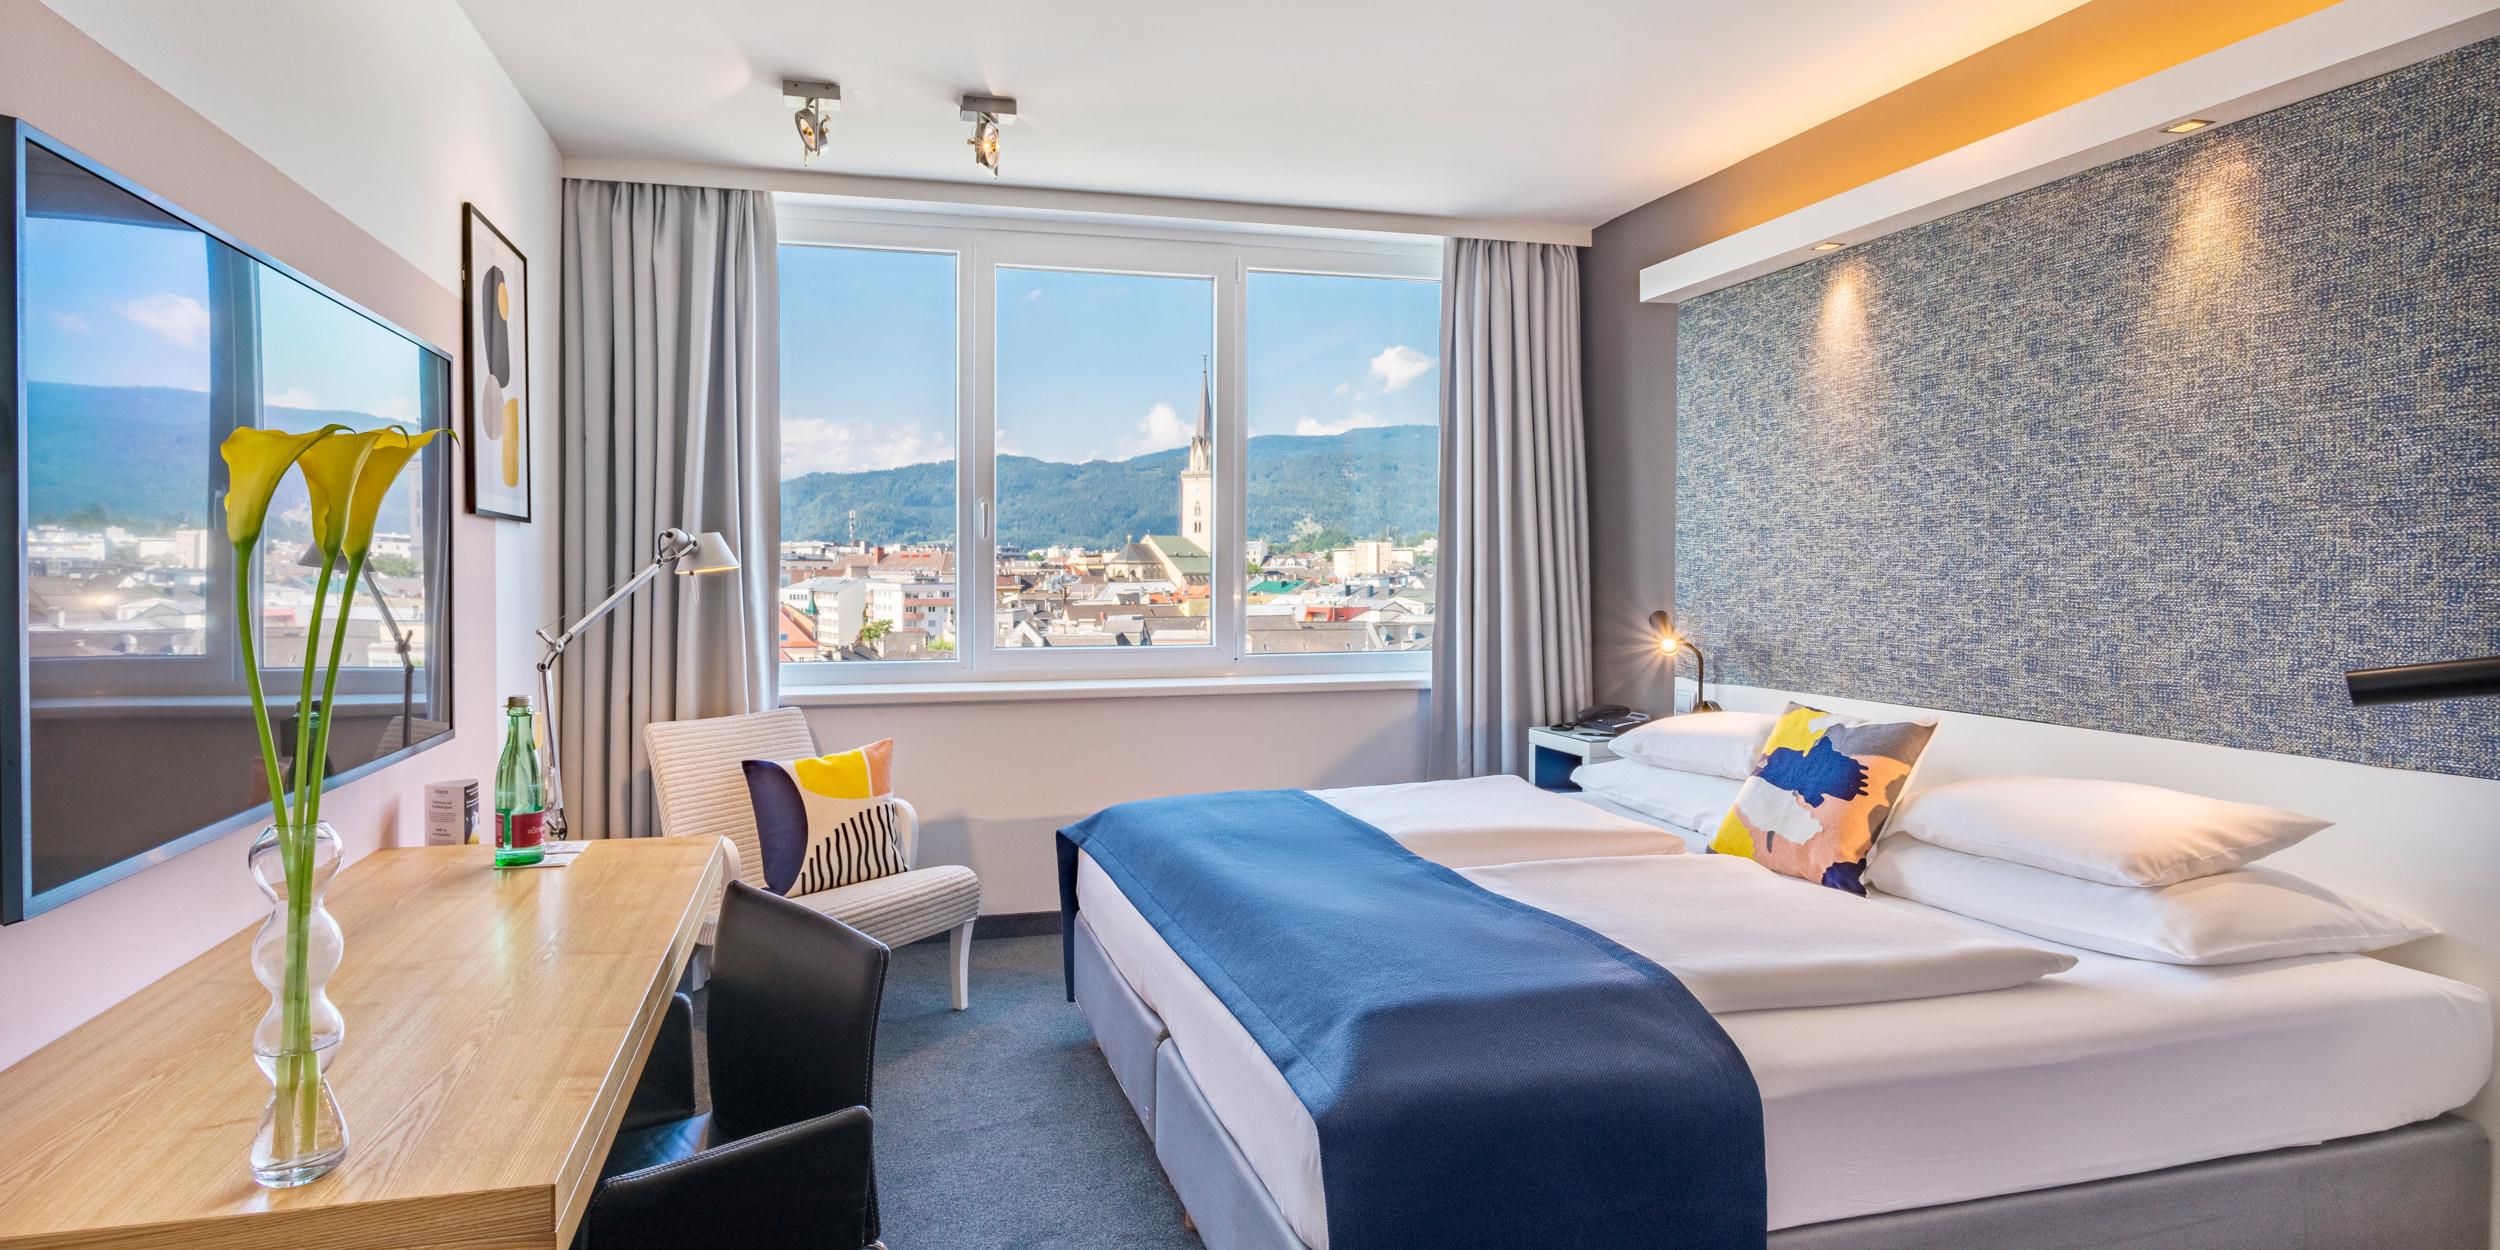 Enjoy pure elegance in our premium rooms with breathtaking views of the Drau at the voco Villach. This exclusive retreat combines modern comfort with a picturesque view of the Drau and the city of Villach. Relax in the stylish ambience and experience first-class amenities that will make your stay unforgettable.